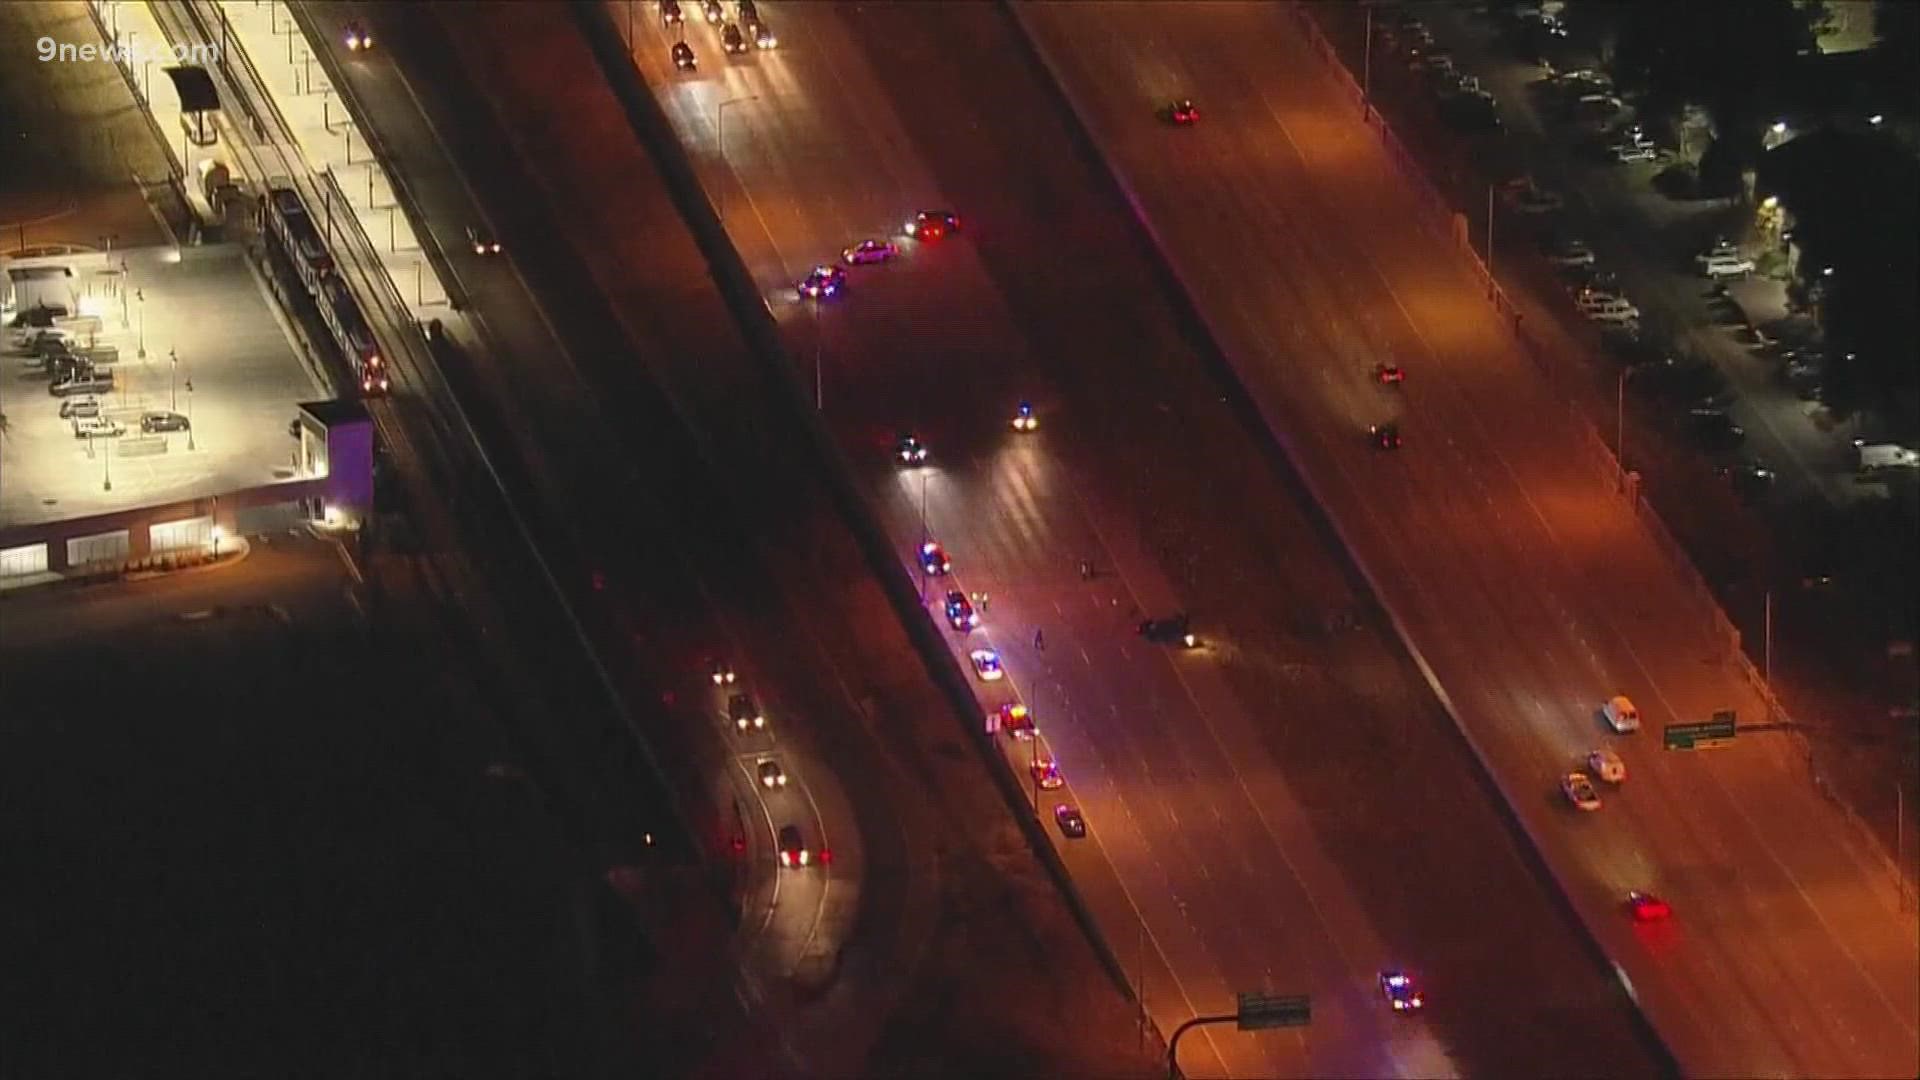 Northbound I-225 is closed at Alameda due to a rollover crash that police said seriously injured one person.